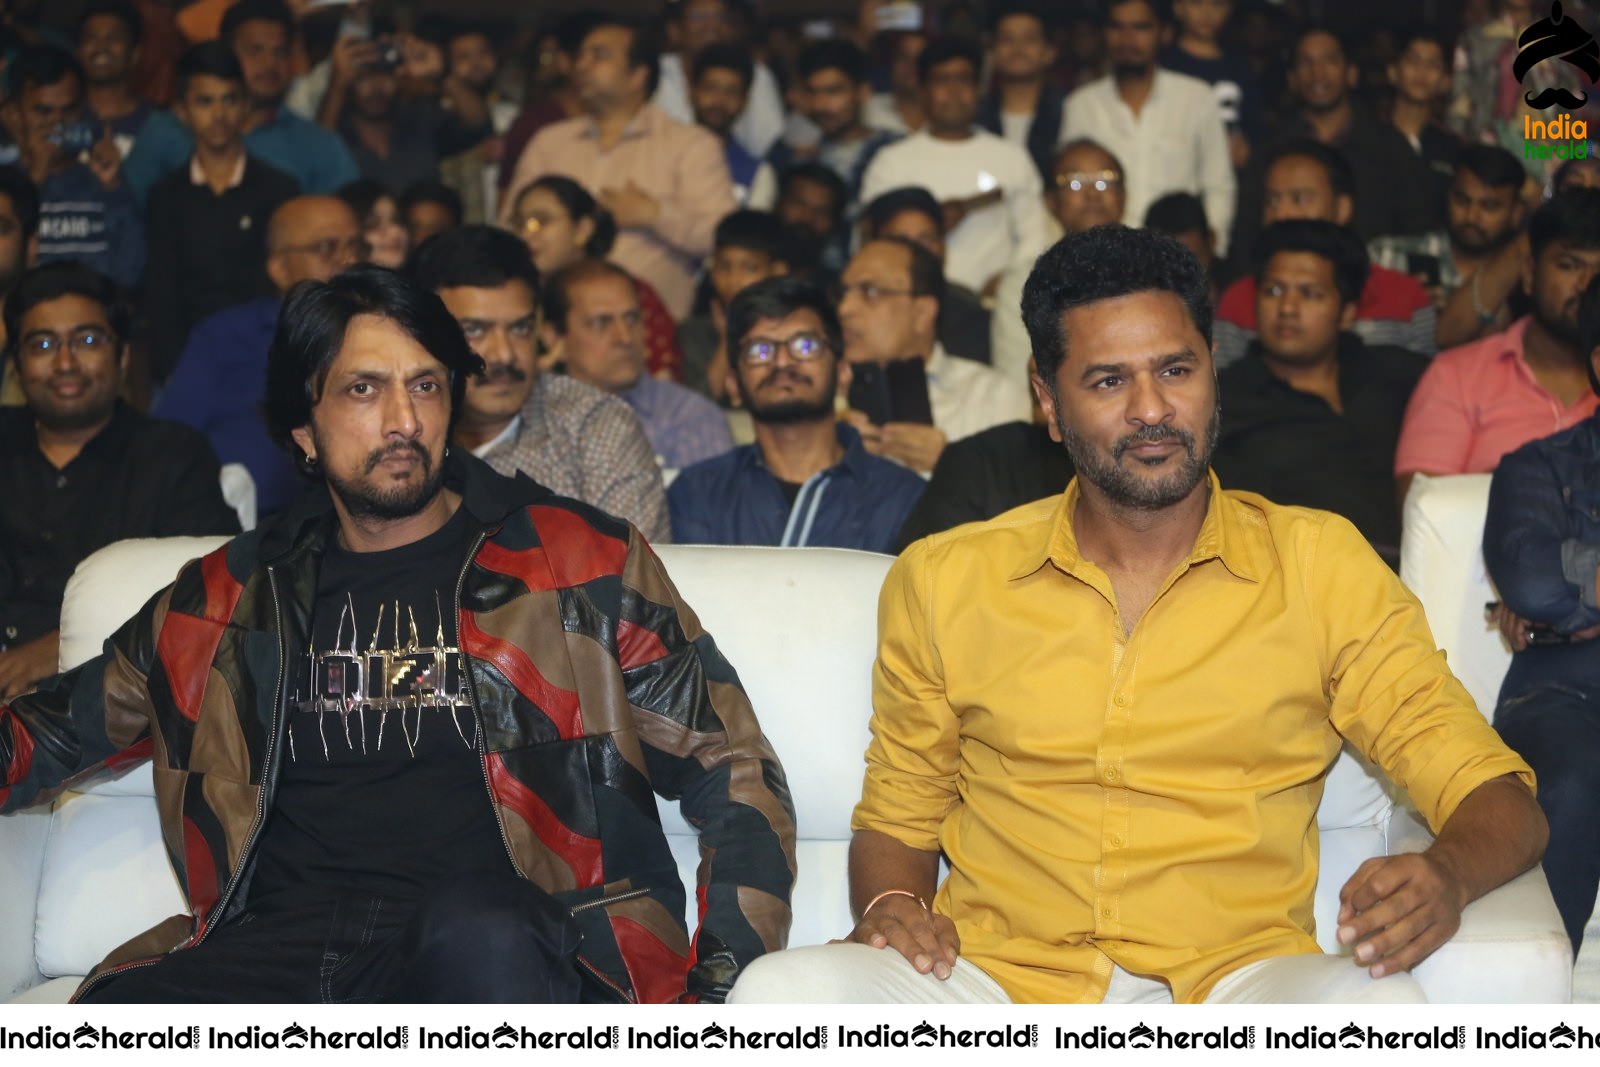 Actor Sudeep and Director Prabhu Deva have a Chit Chat